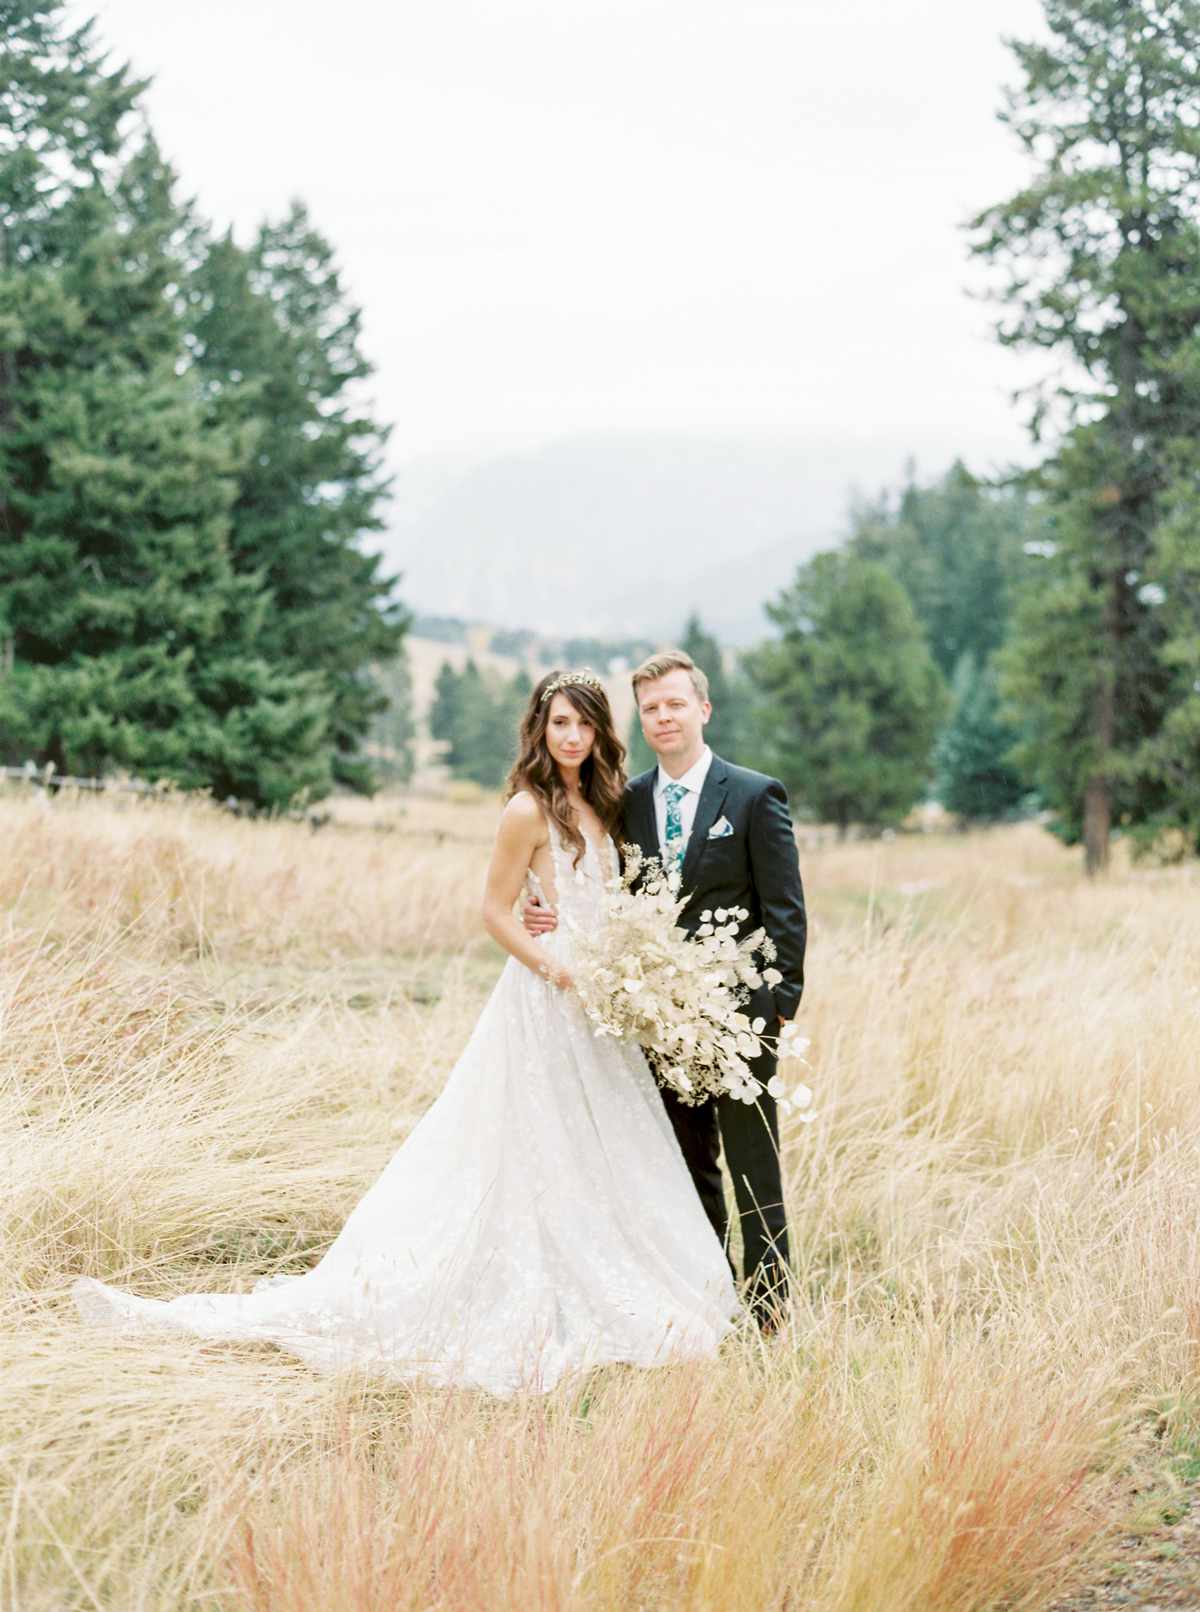 bride and groom in field with pine trees in background